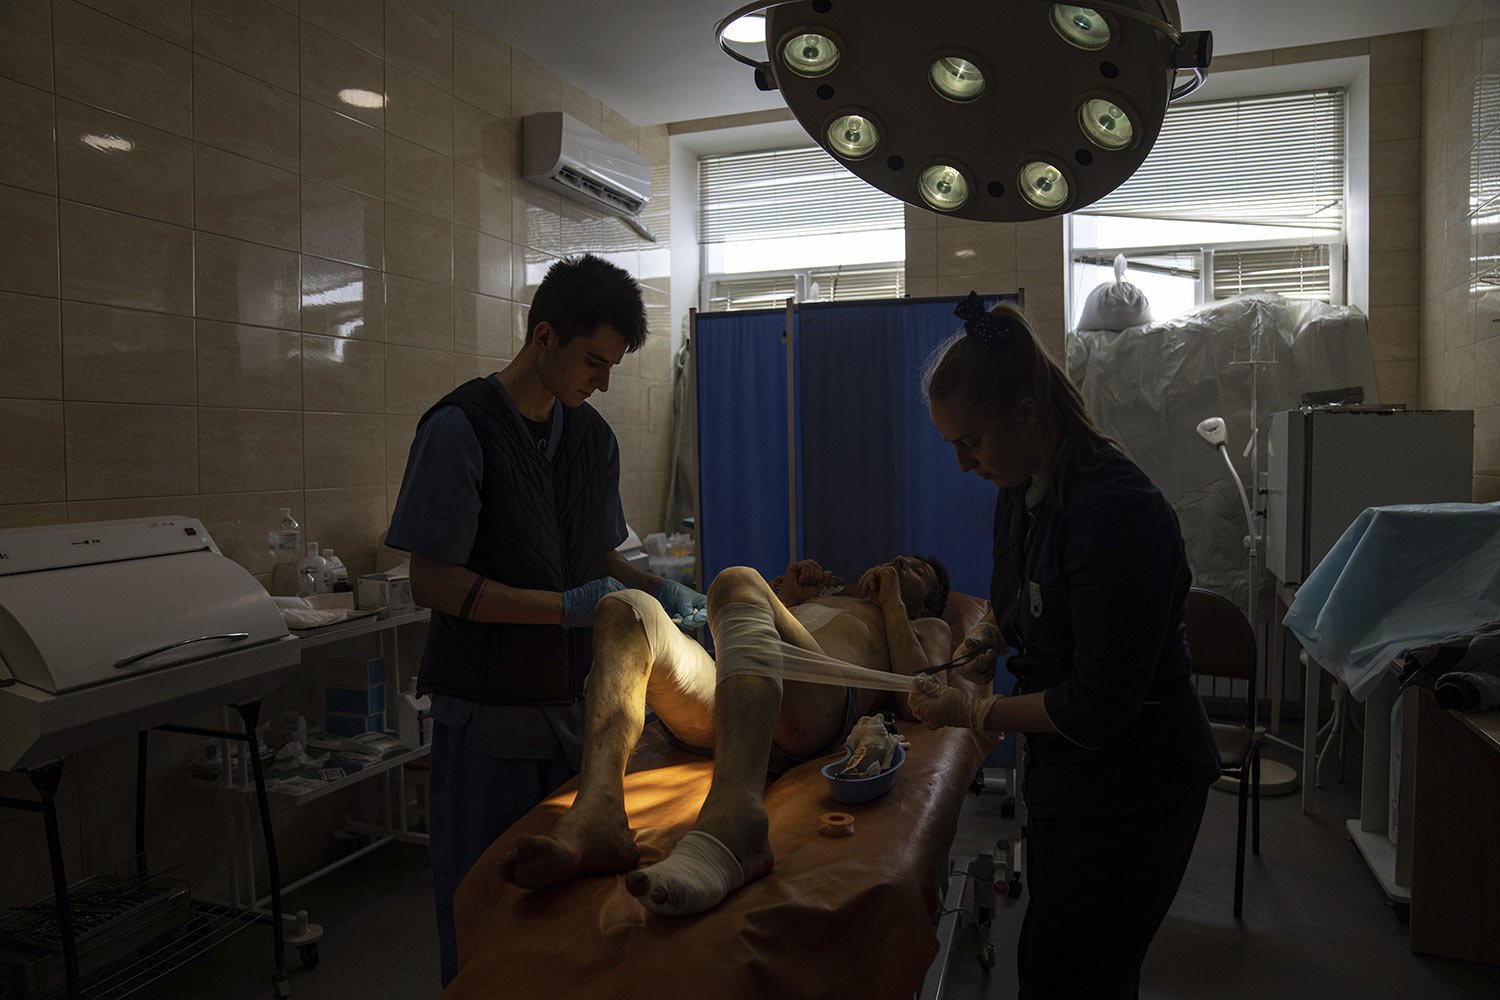  Medical workers treat the wounds of Volodymyr Nikiforov, 40, who was injured by shelling near Barvenkove, at a hospital in Kramatorsk in eastern Ukraine, Tuesday, April 26, 2022. (AP Photo/Evgeniy Maloletka) 